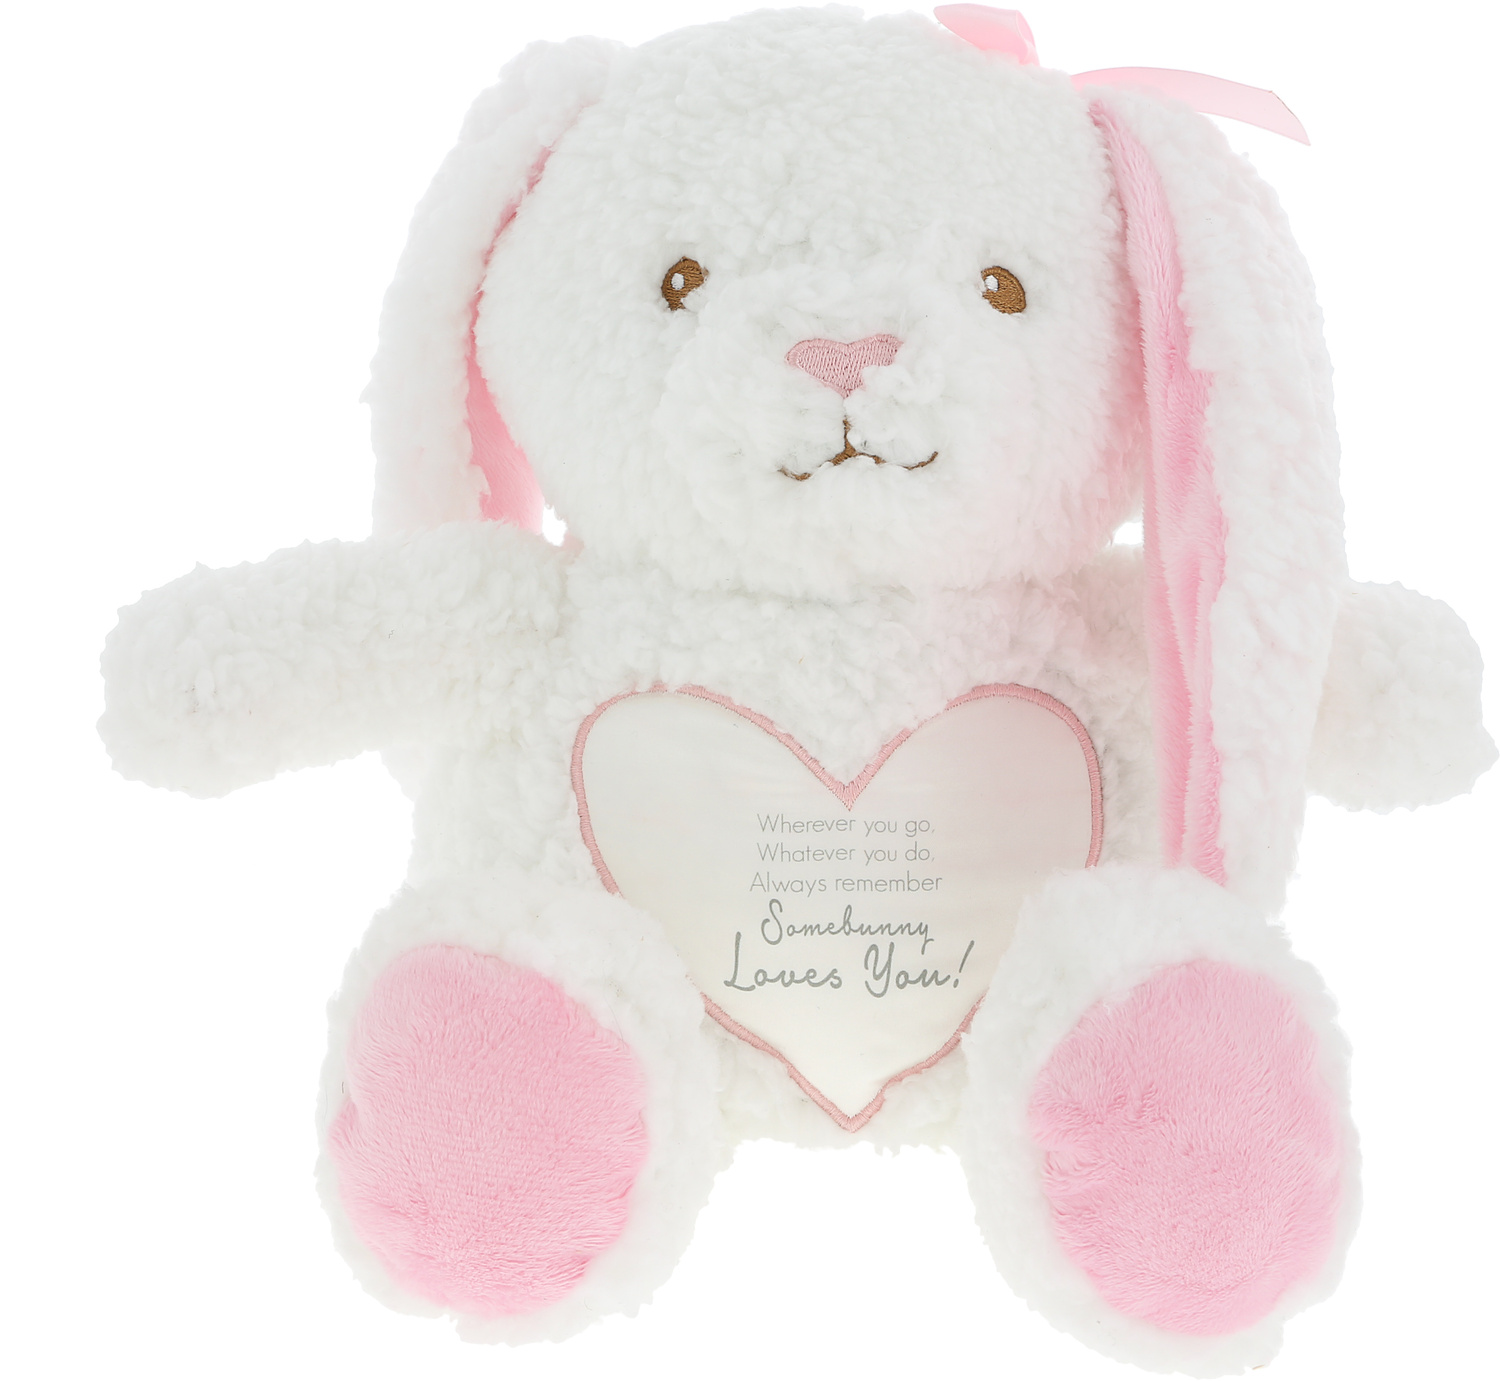 Somebunny Pink Plush by Comfort Collection - Somebunny Pink Plush - 9.5" Plush Bunny